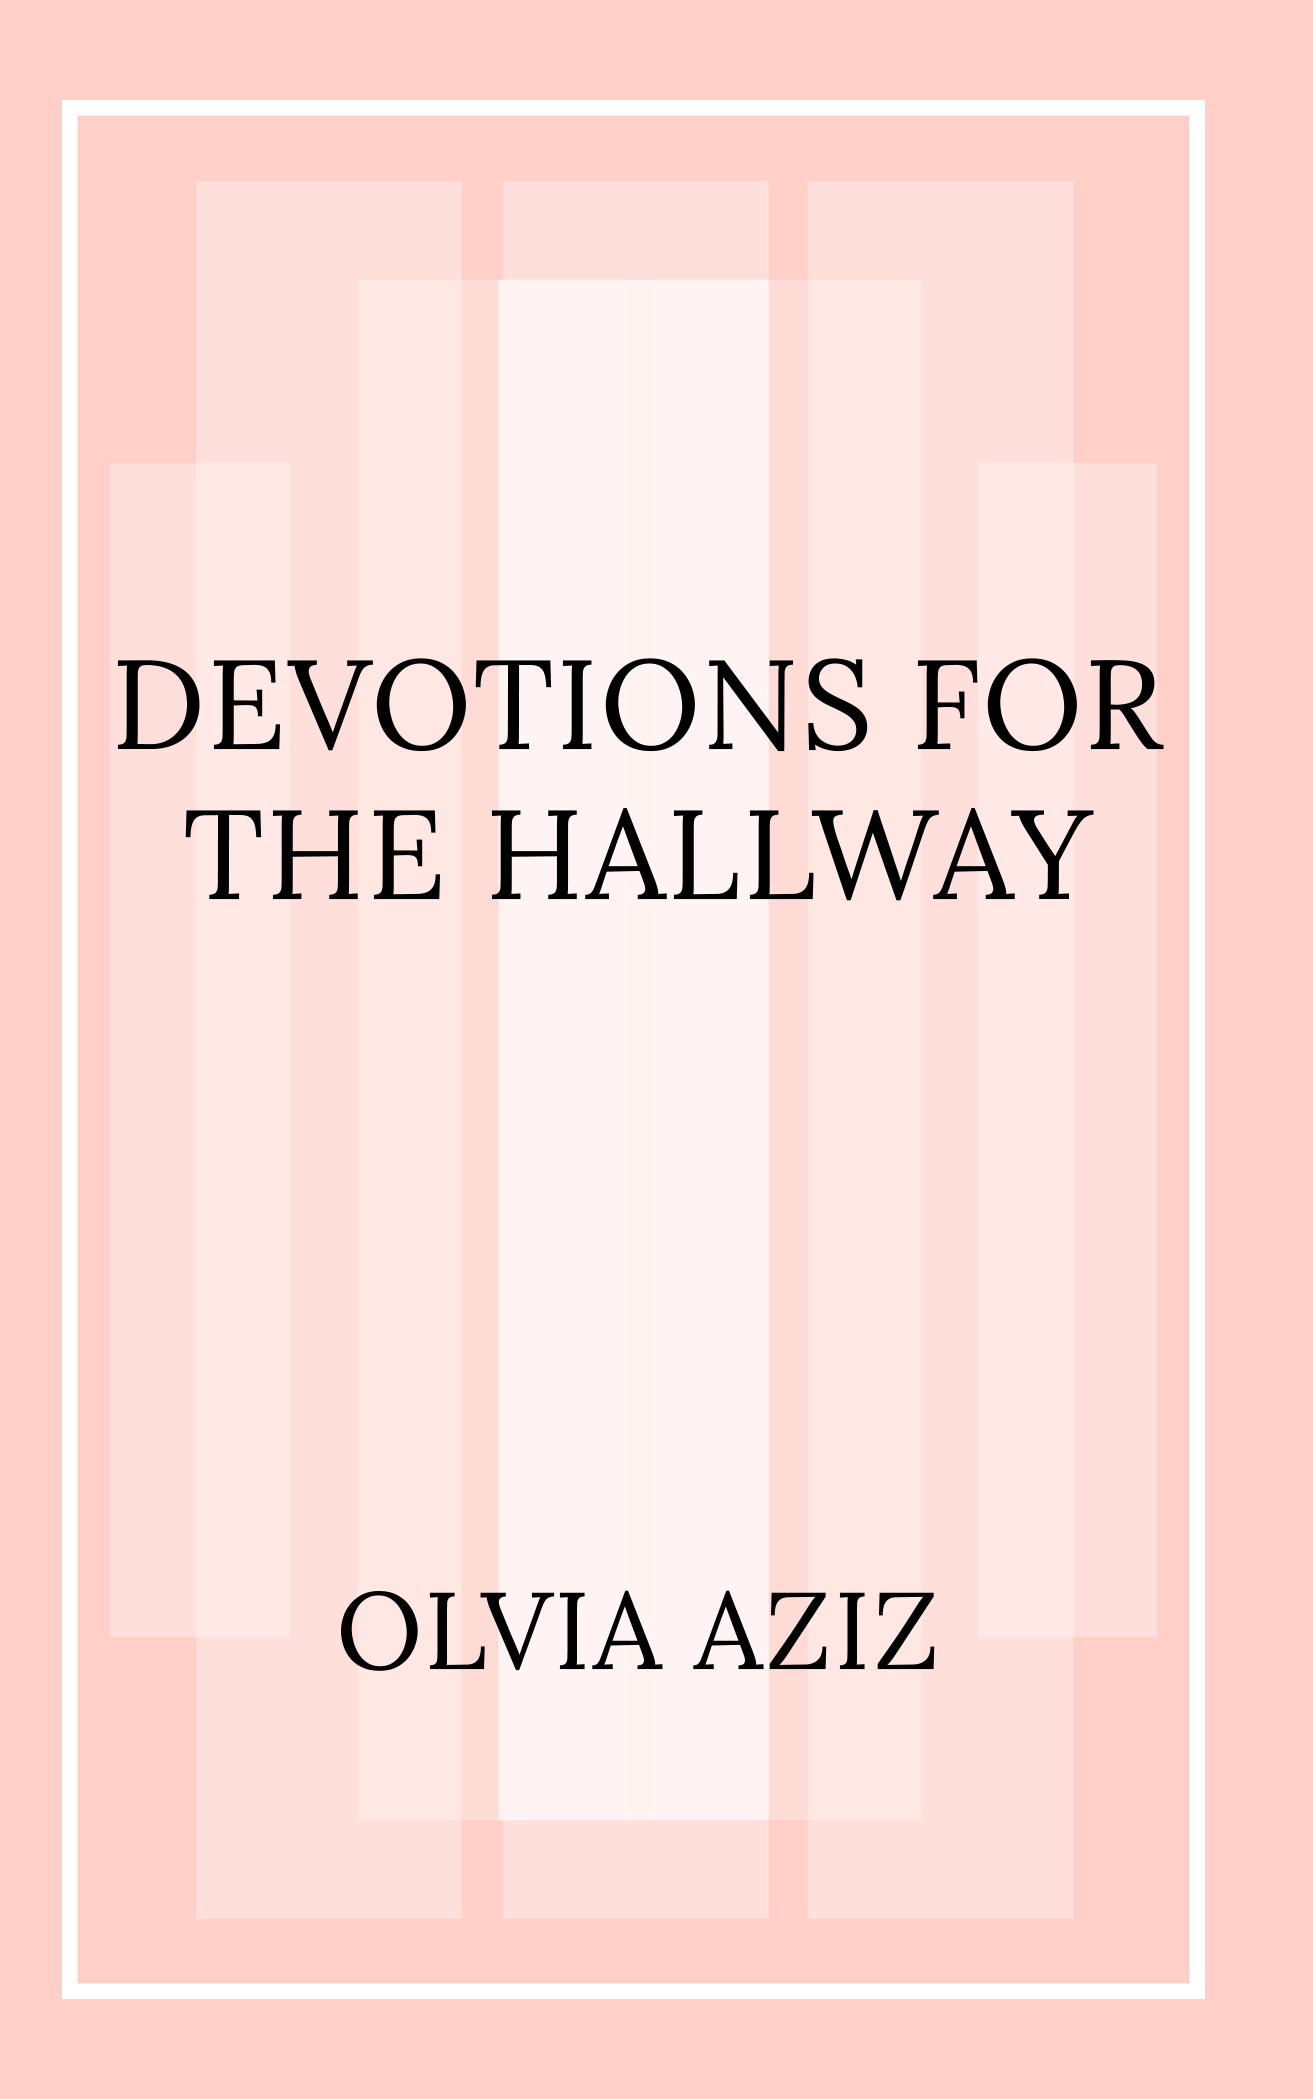 Devotions For the Hallway Cover copy